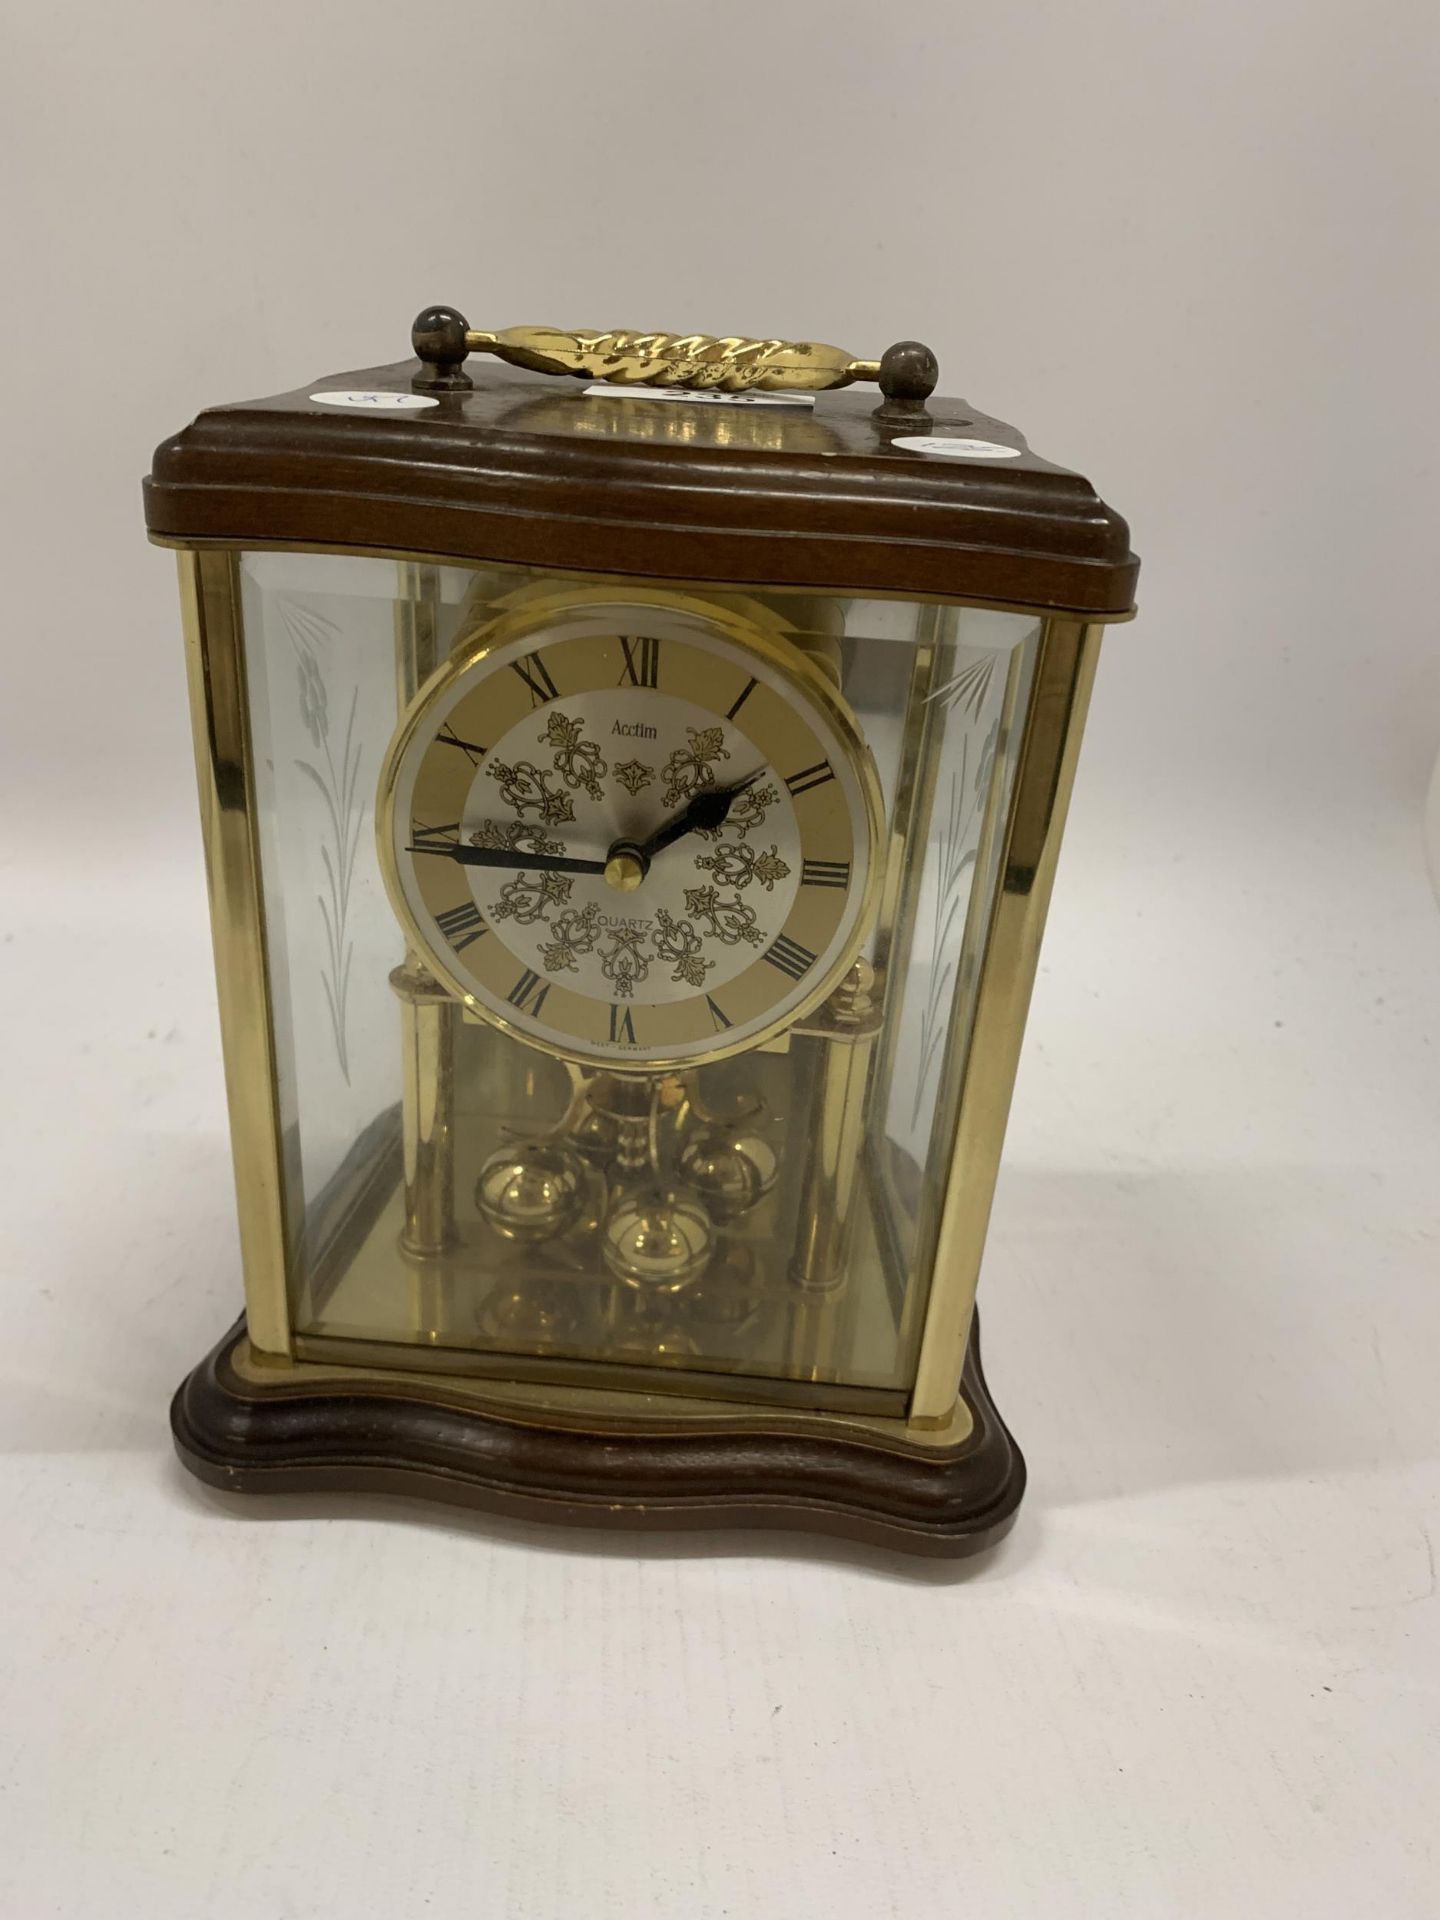 A WOOD AND GLASS CASED ANNIVERSARY CLOCK MADE BY ACCTIM